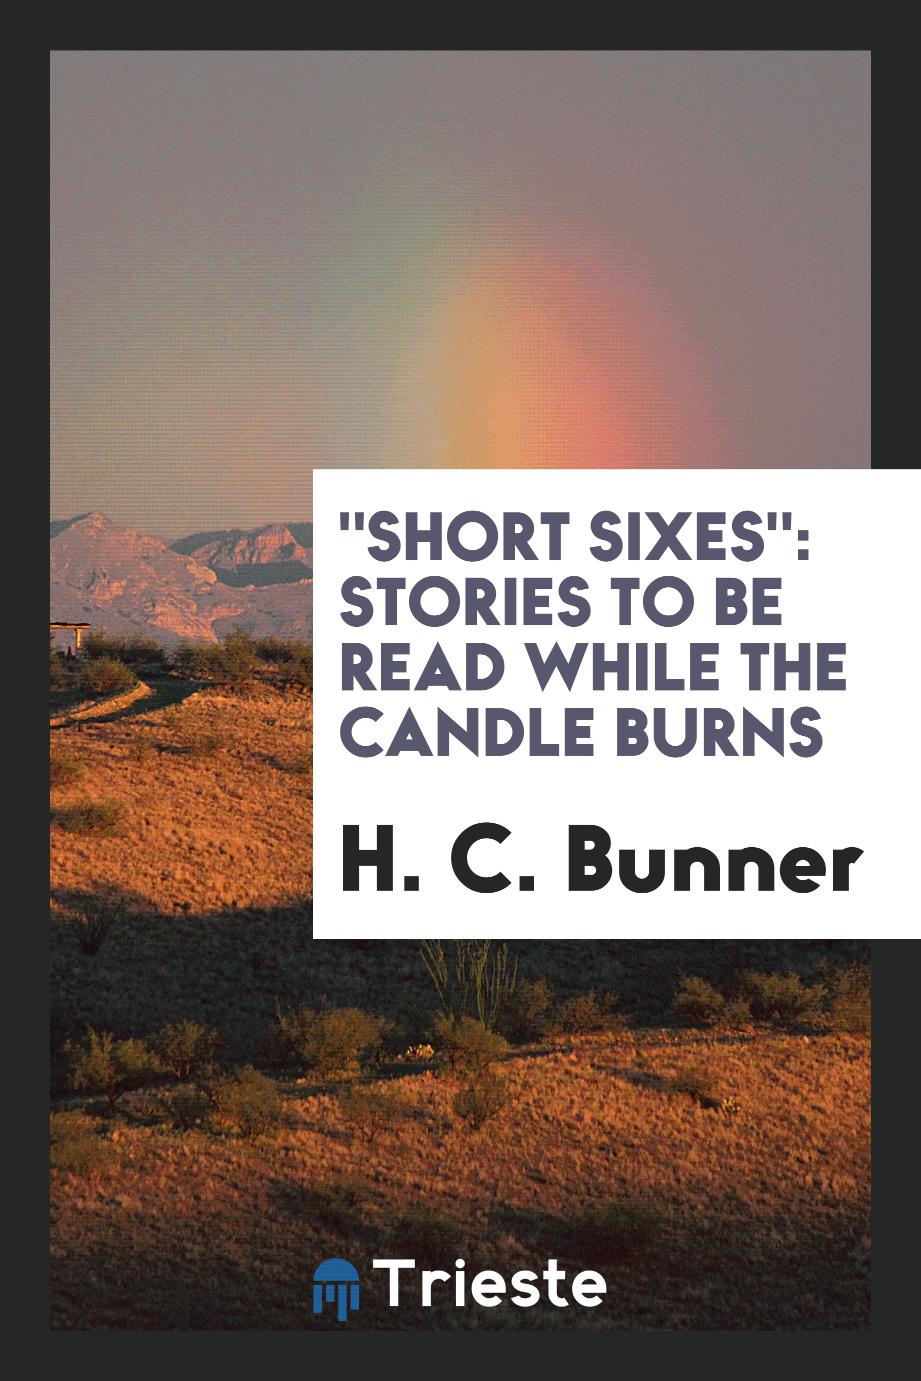 "Short sixes": stories to be read while the candle burns